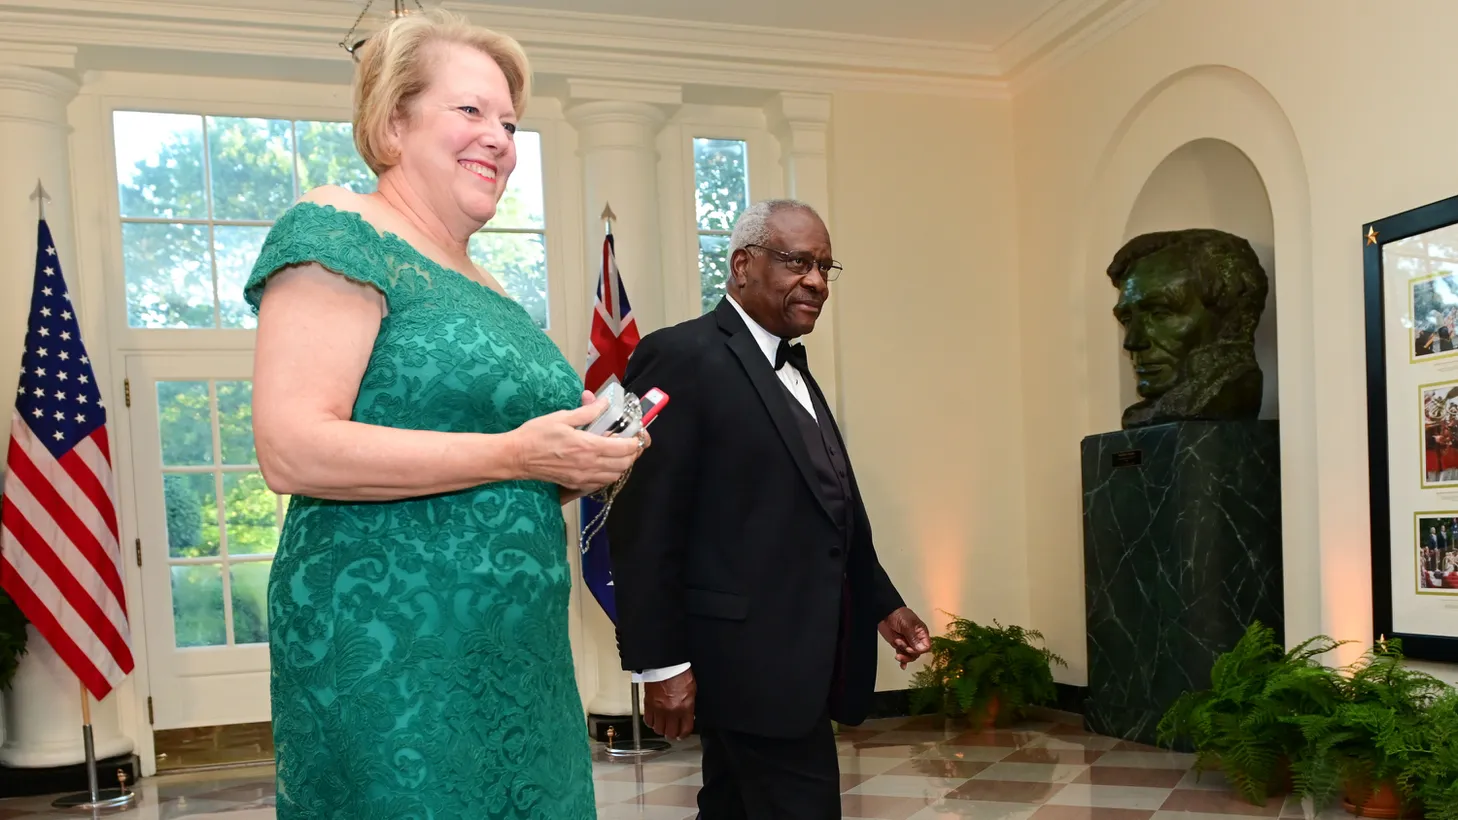 U.S. Supreme Court Justice Clarence Thomas arrives with his wife, Ginni Thomas, for a state dinner for Australia’s Prime Minister Scott Morrison at the White House on Sep. 20, 2019.